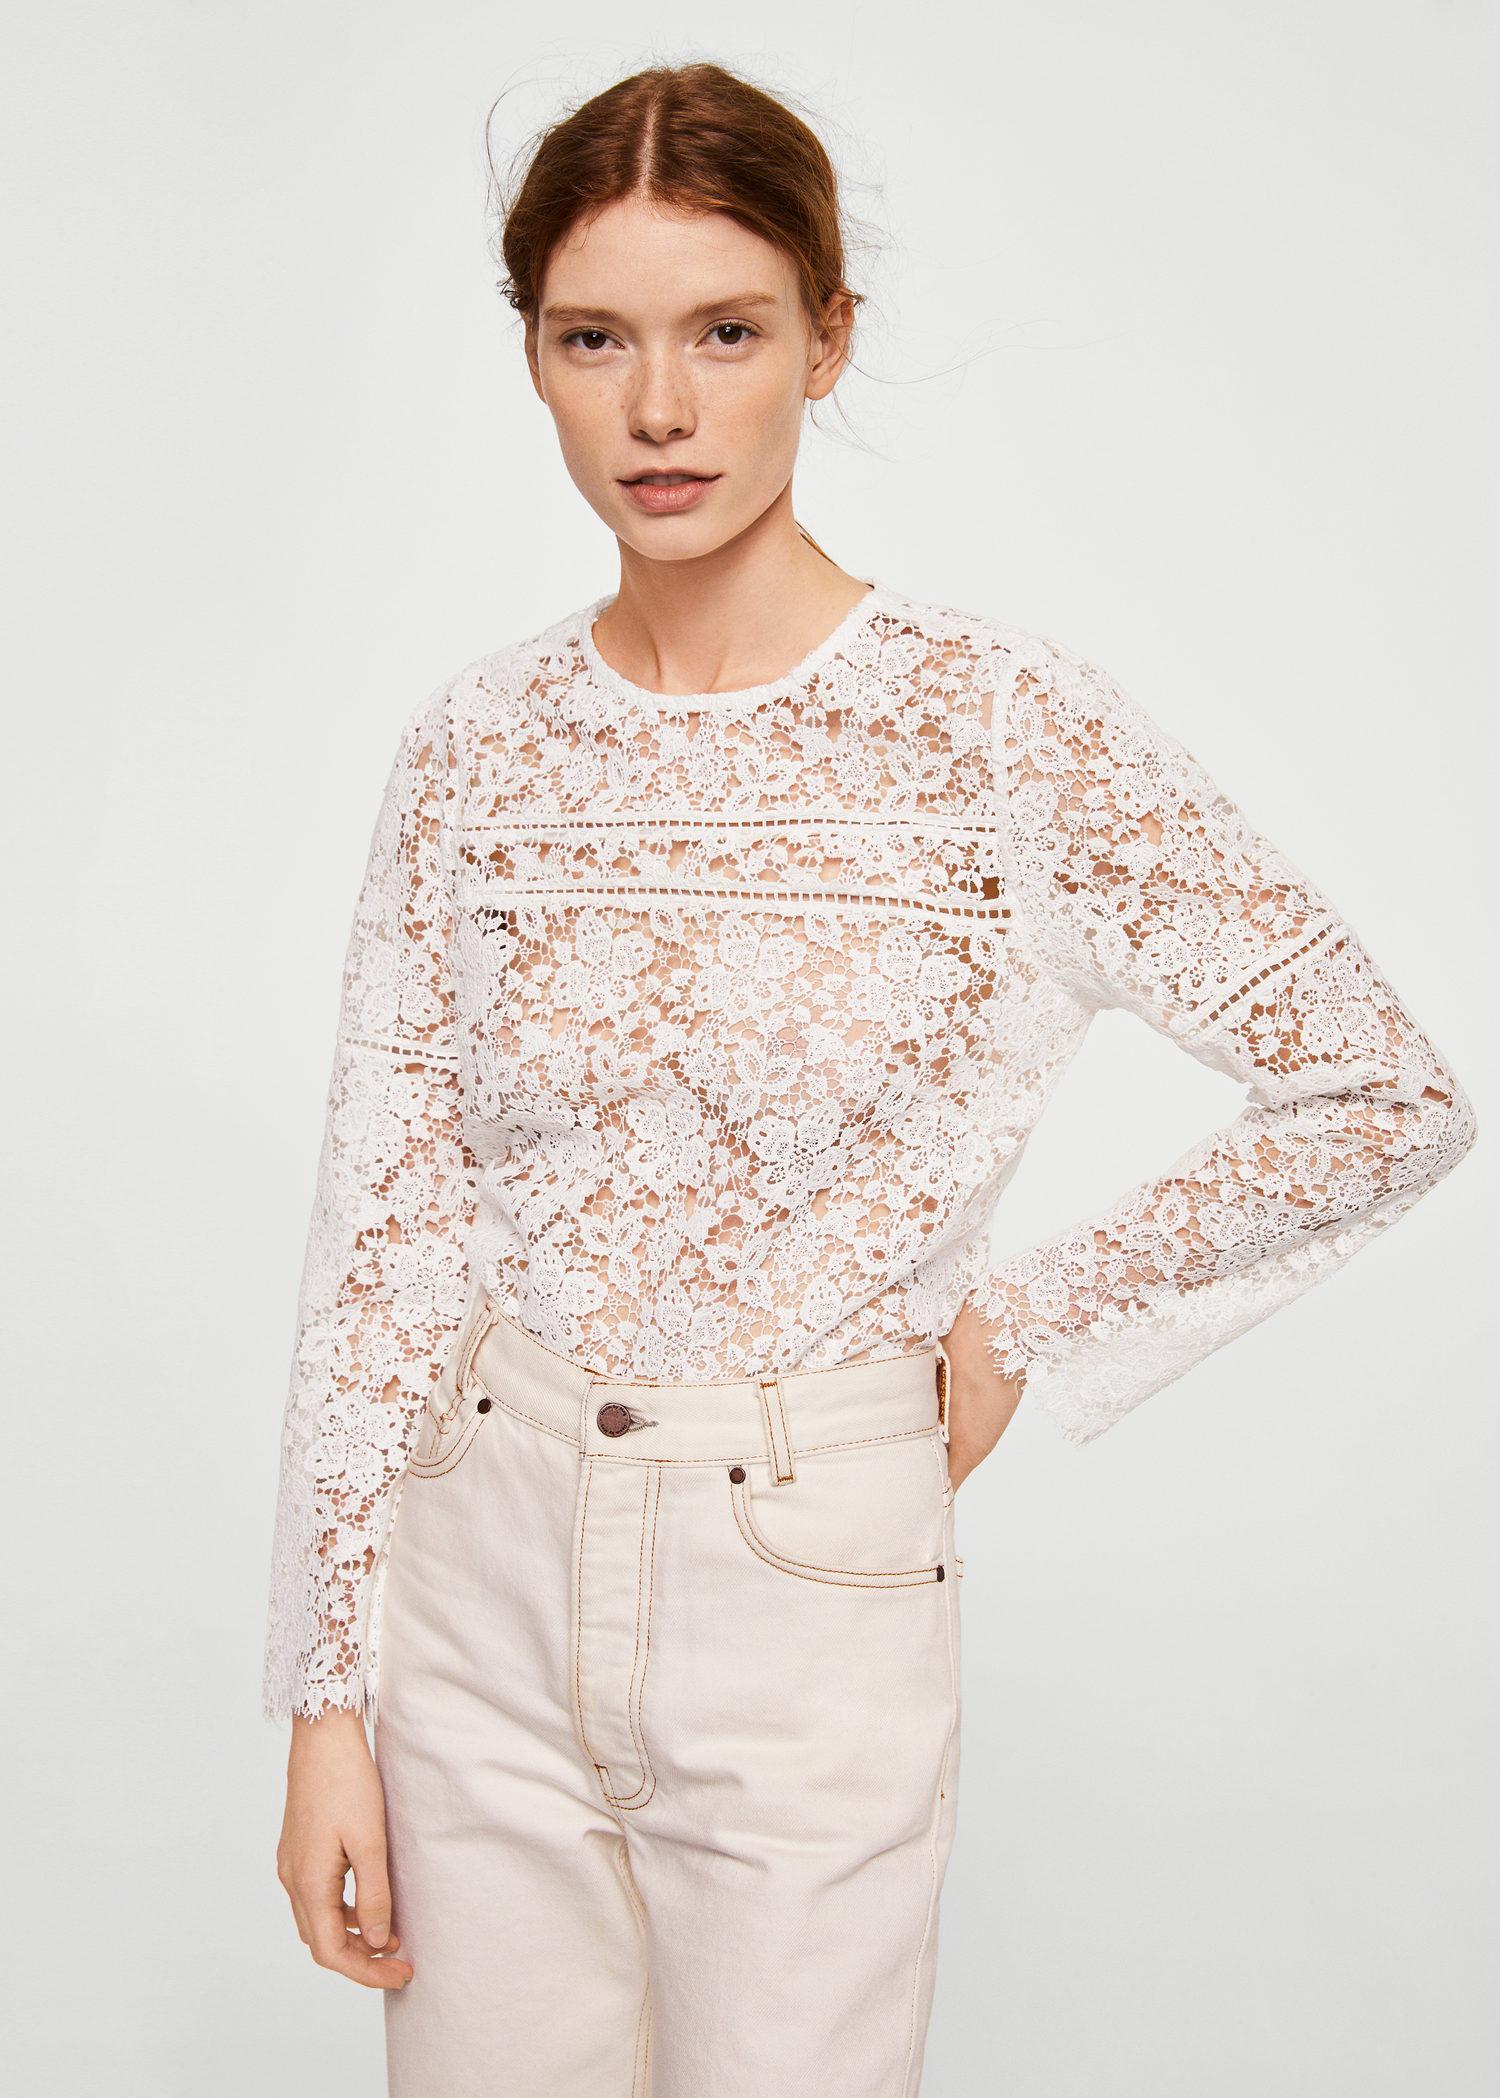 Floral All-over Lace Blouse White MANGO Blouses | Superbalist.com